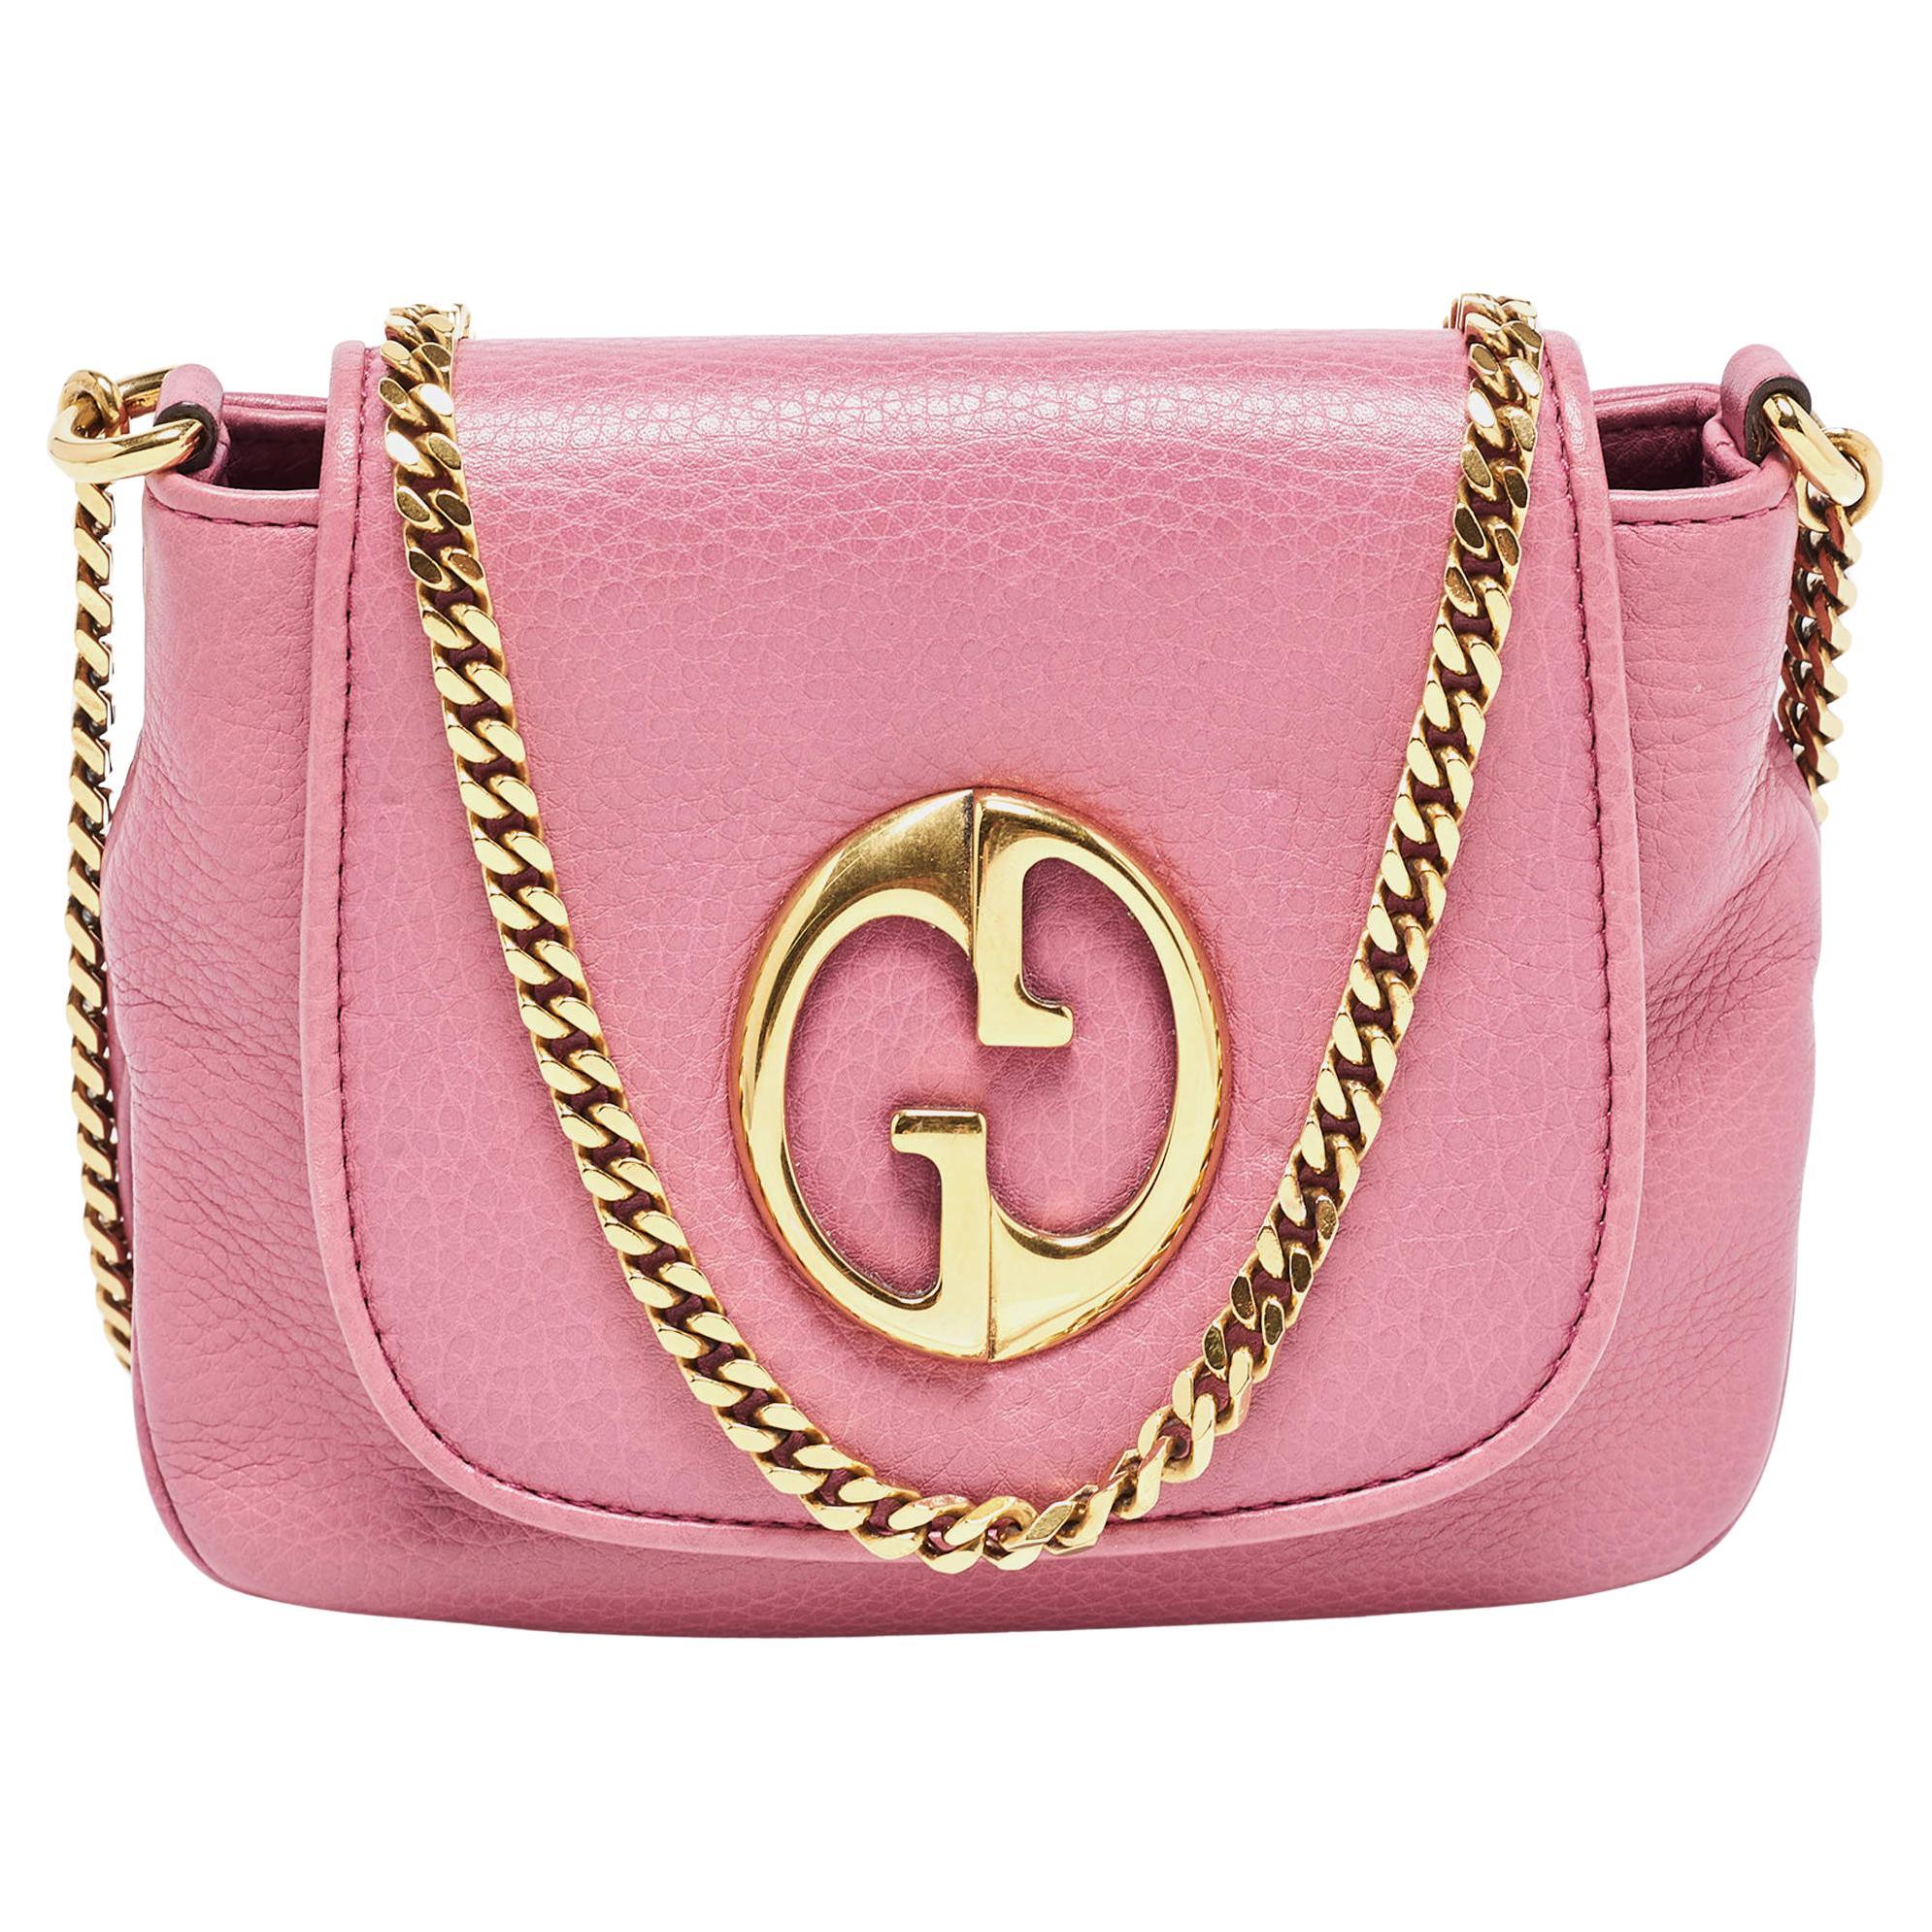 Gucci Pink Leather Small 1973 Chain Crossbody Bag